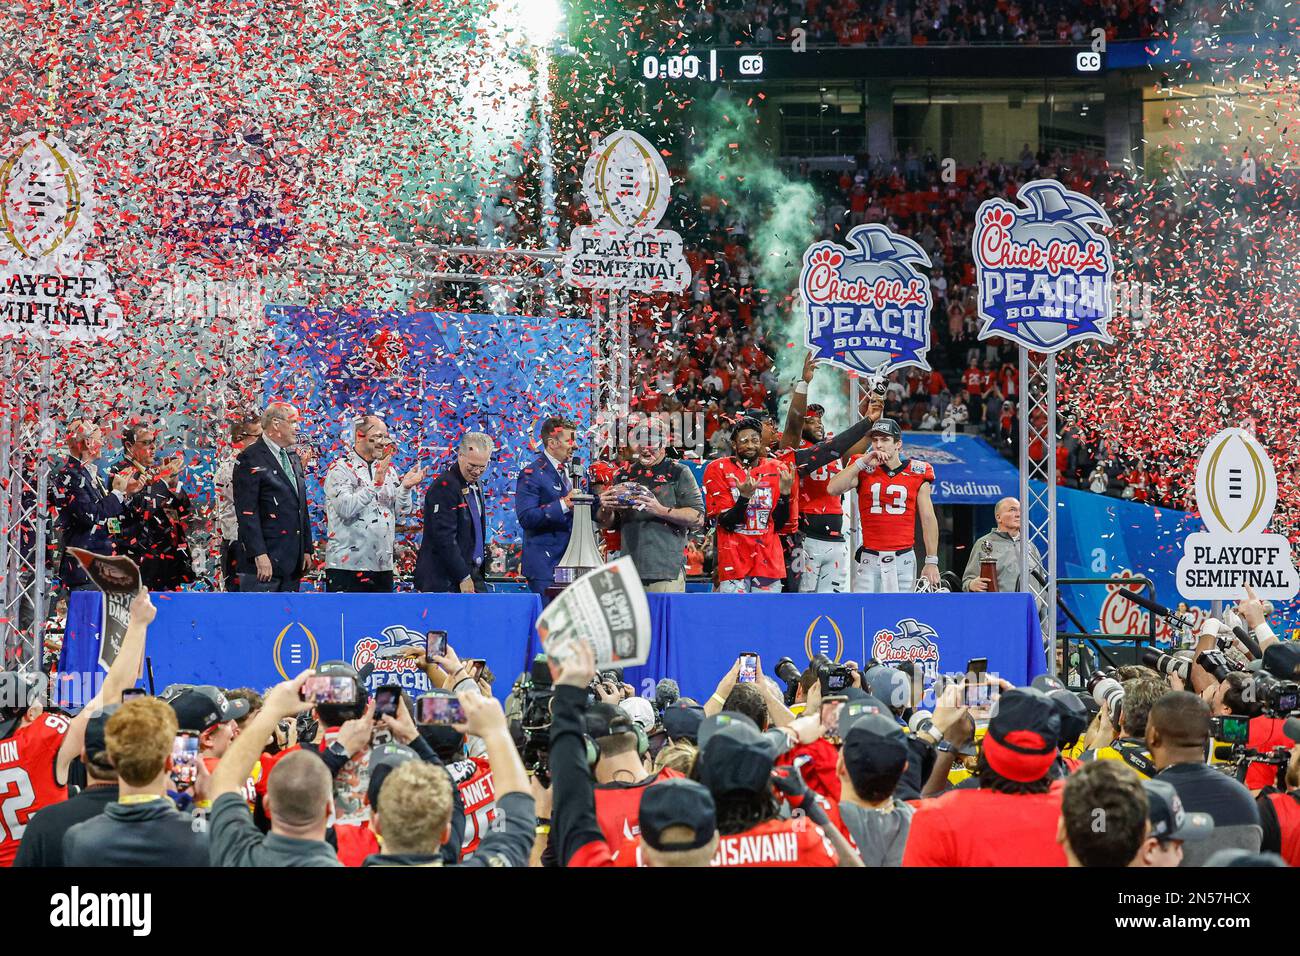 https://c8.alamy.com/comp/2N57HCX/december-31-2022-the-trophy-presentation-after-the-chick-fil-a-peach-bowl-a-college-football-playoff-semifinal-featuring-the-4-ohio-state-buckeyes-and-the-1-georgia-bulldogs-played-at-mercedes-benz-stadium-in-atlanta-georgia-the-georgia-bulldogs-come-from-behind-to-defeat-ohio-state-42-41-cecil-copelandmarinmediaorgcsm-2N57HCX.jpg